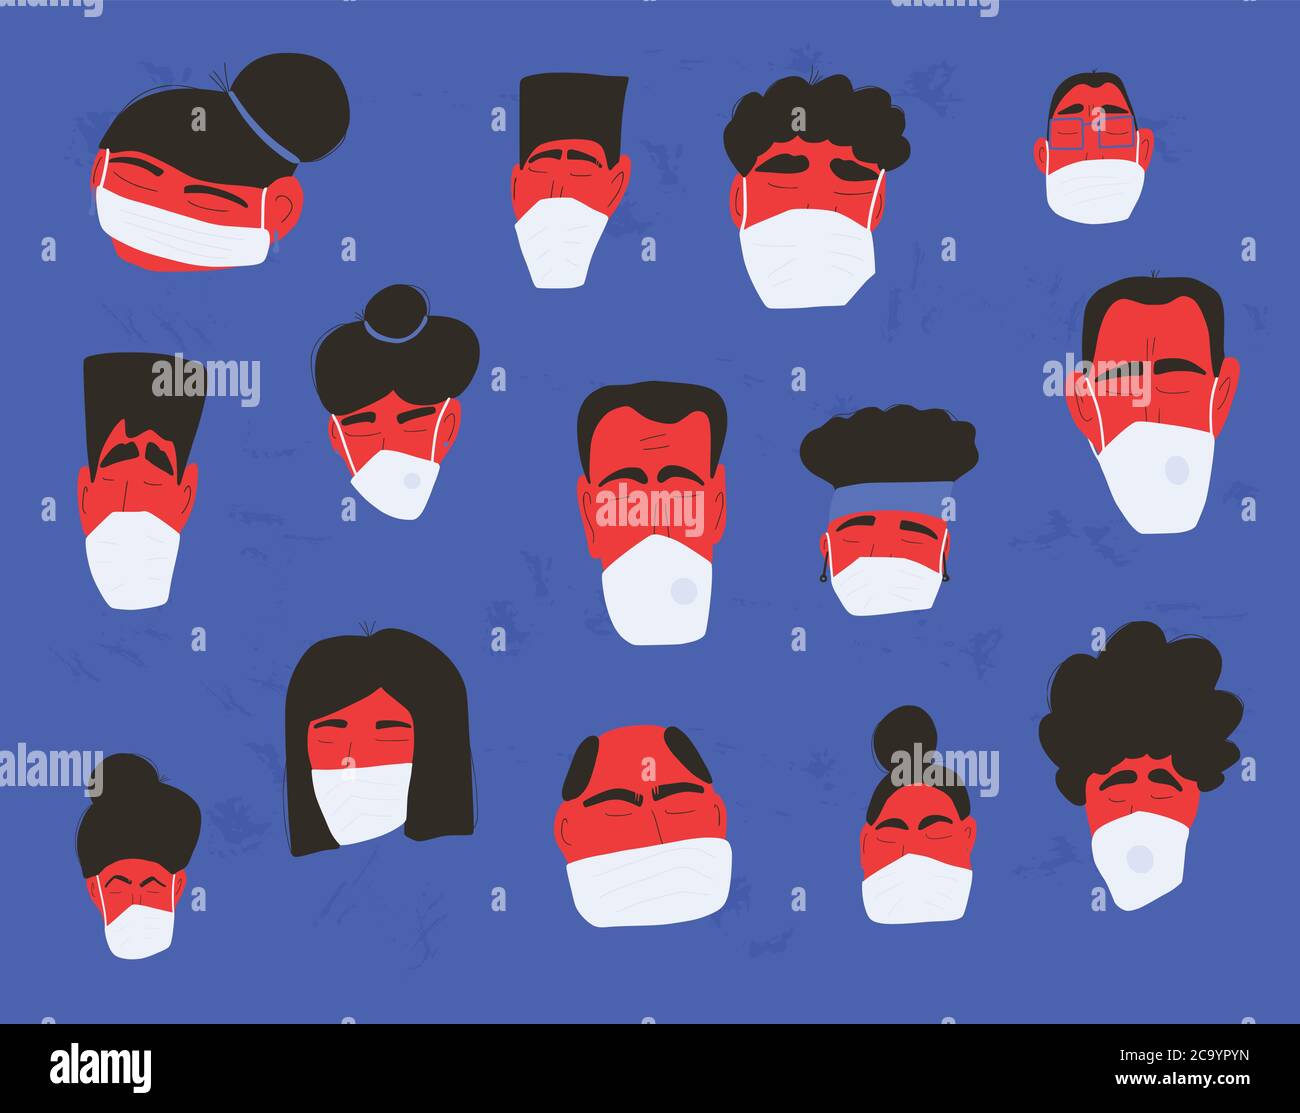 Coronavirus protection concept. Men and women in white medical face mask. Characters in prevention masks. Crowd of people protecting from virus infect Stock Vector